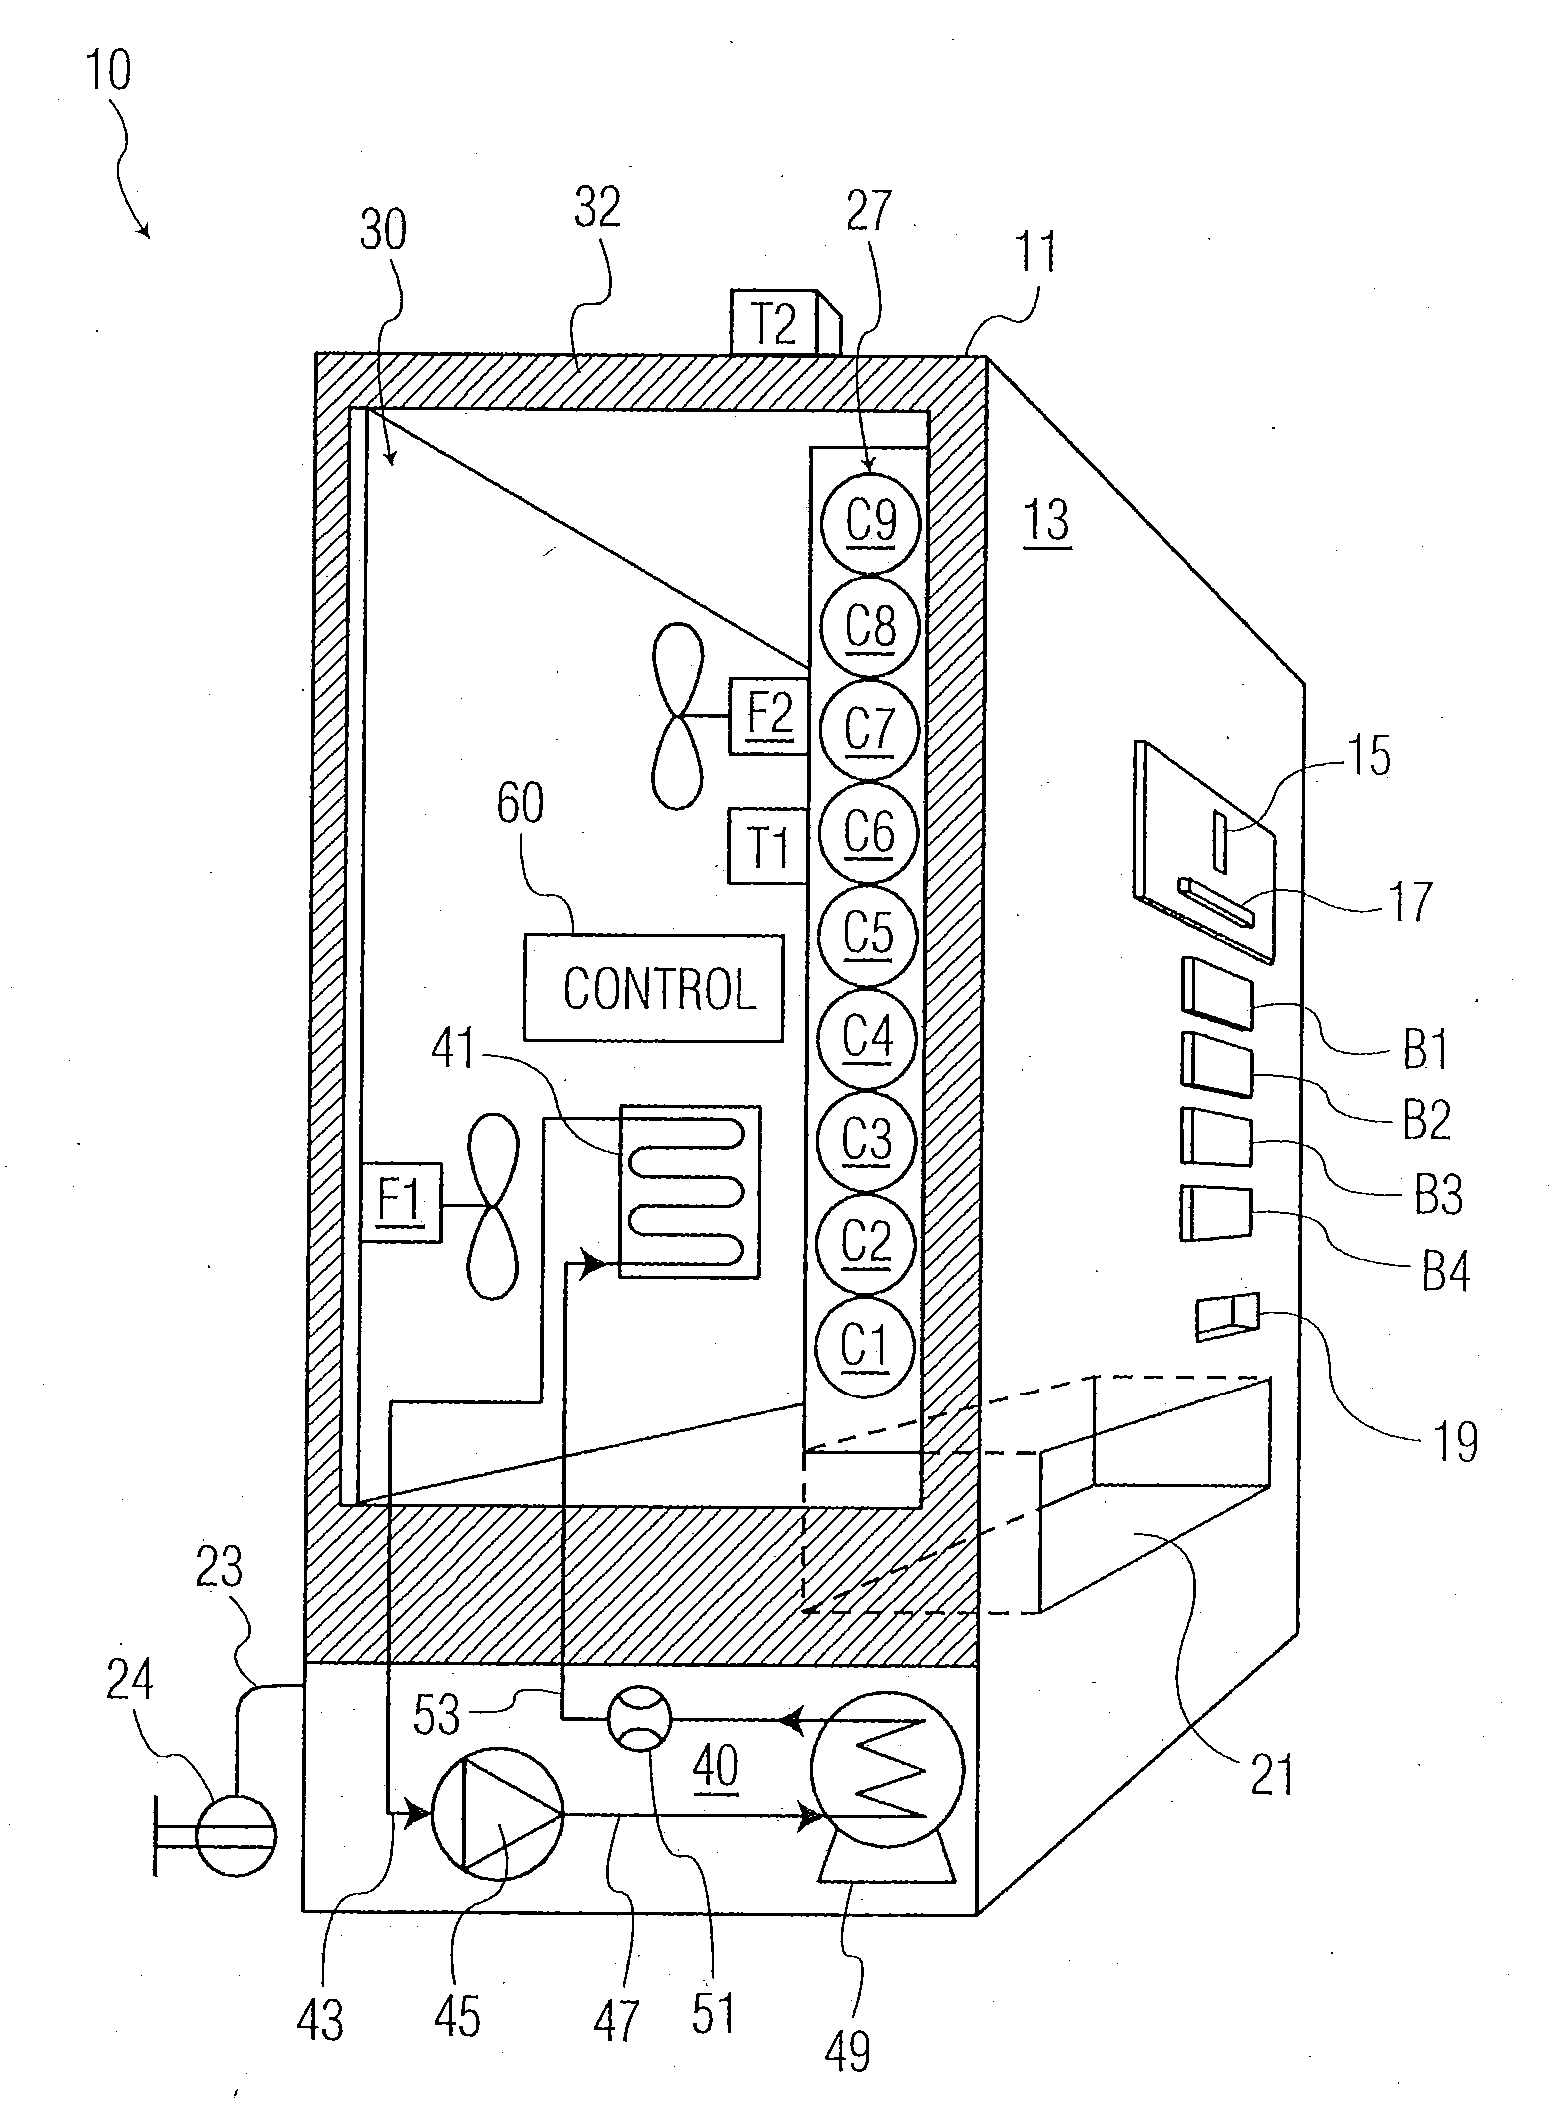 Method and apparatus for conserving power consumed by a vending machine utilizing audio signal detection